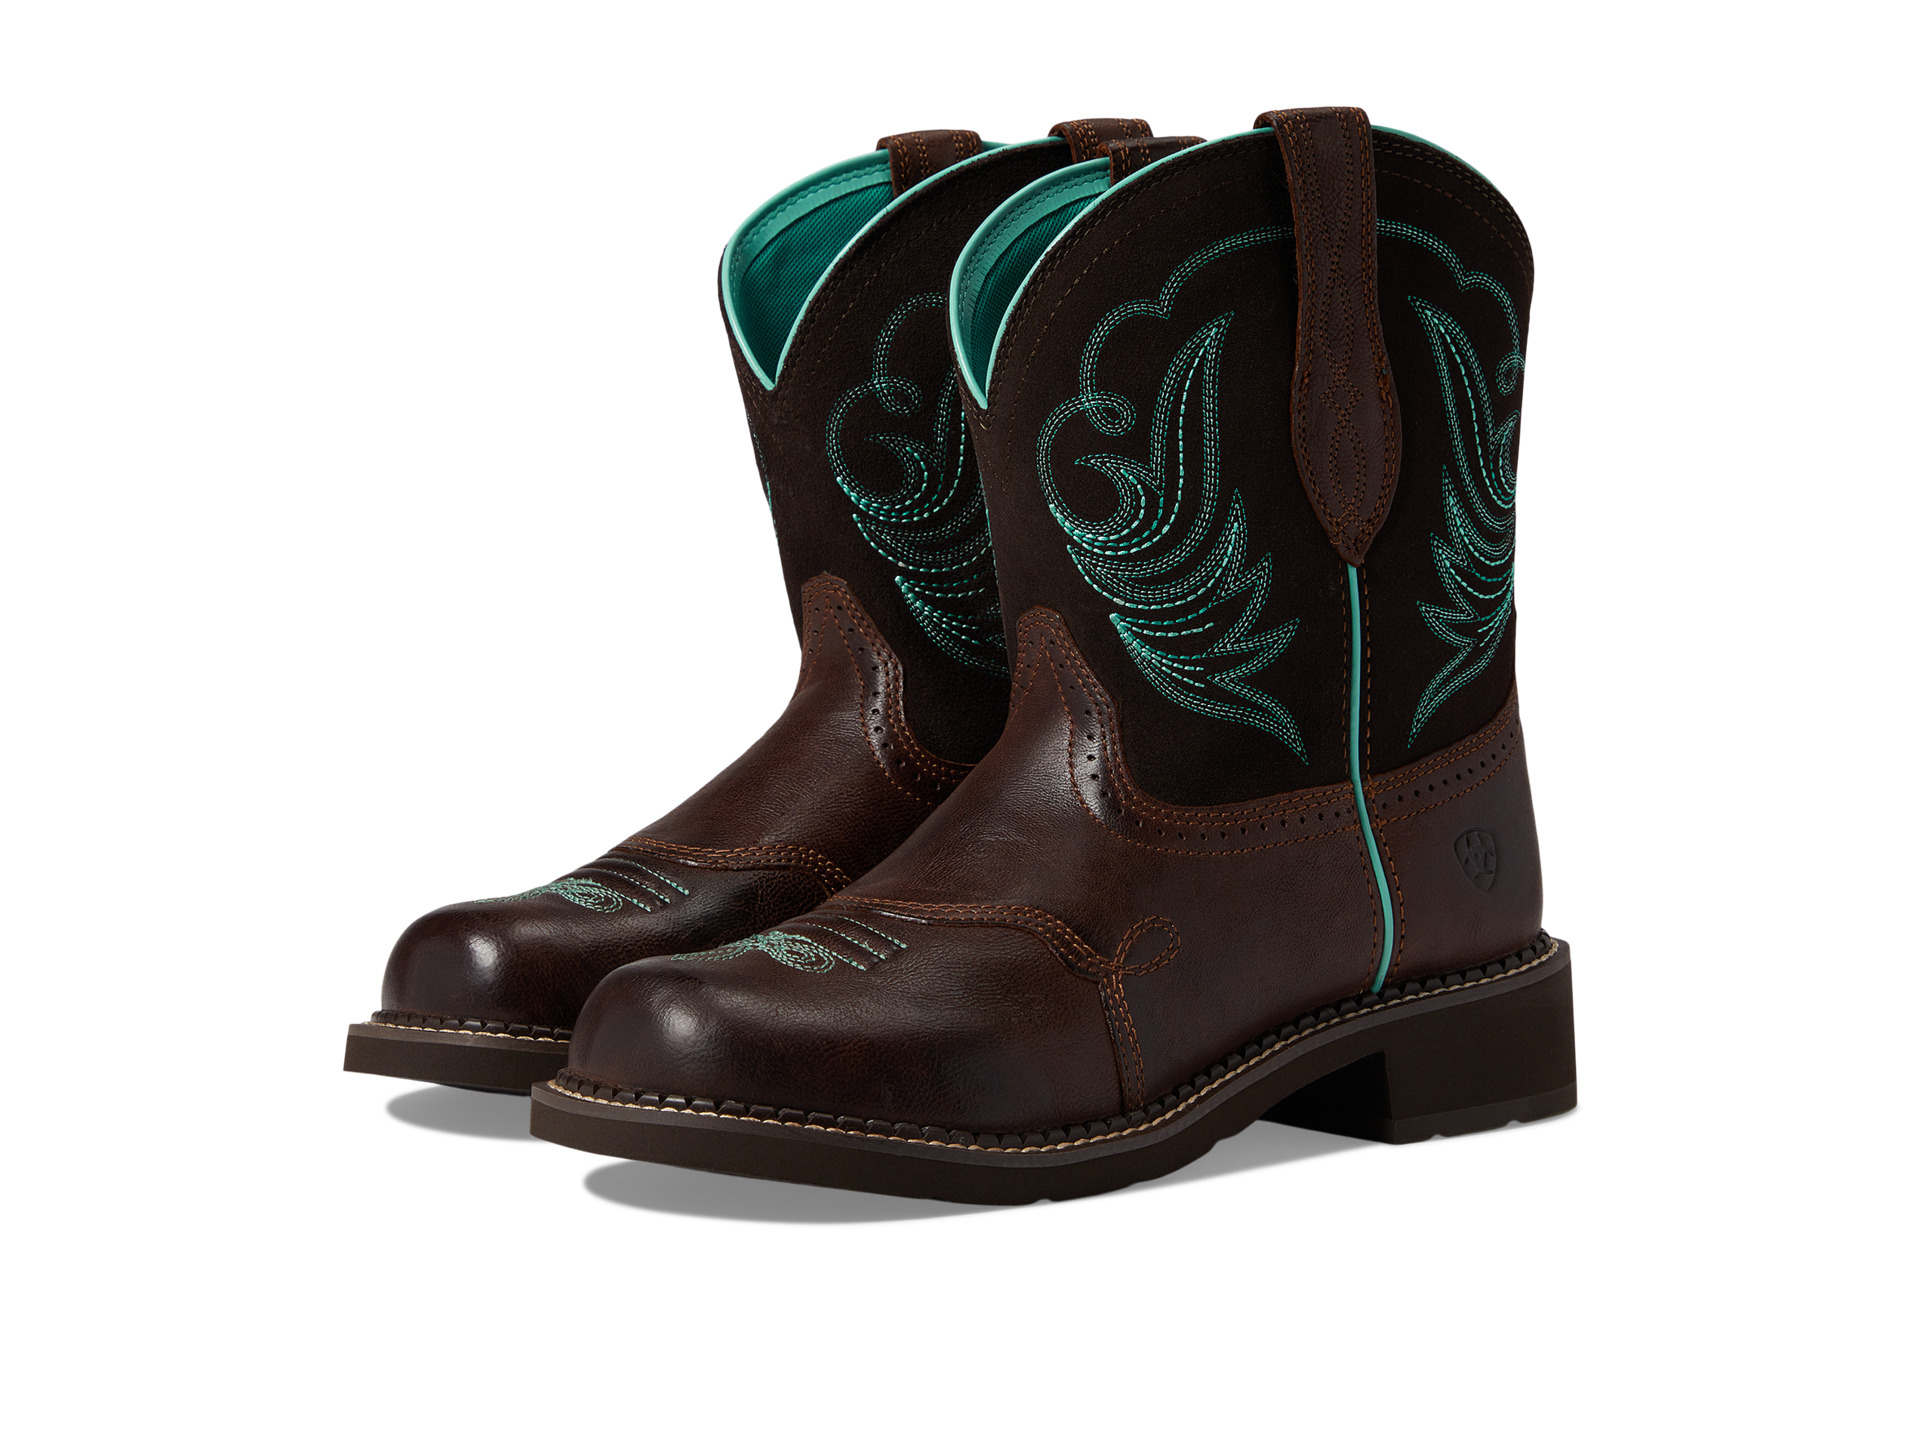 Ariat, Shoes, Women | Shipped Free at Zappos